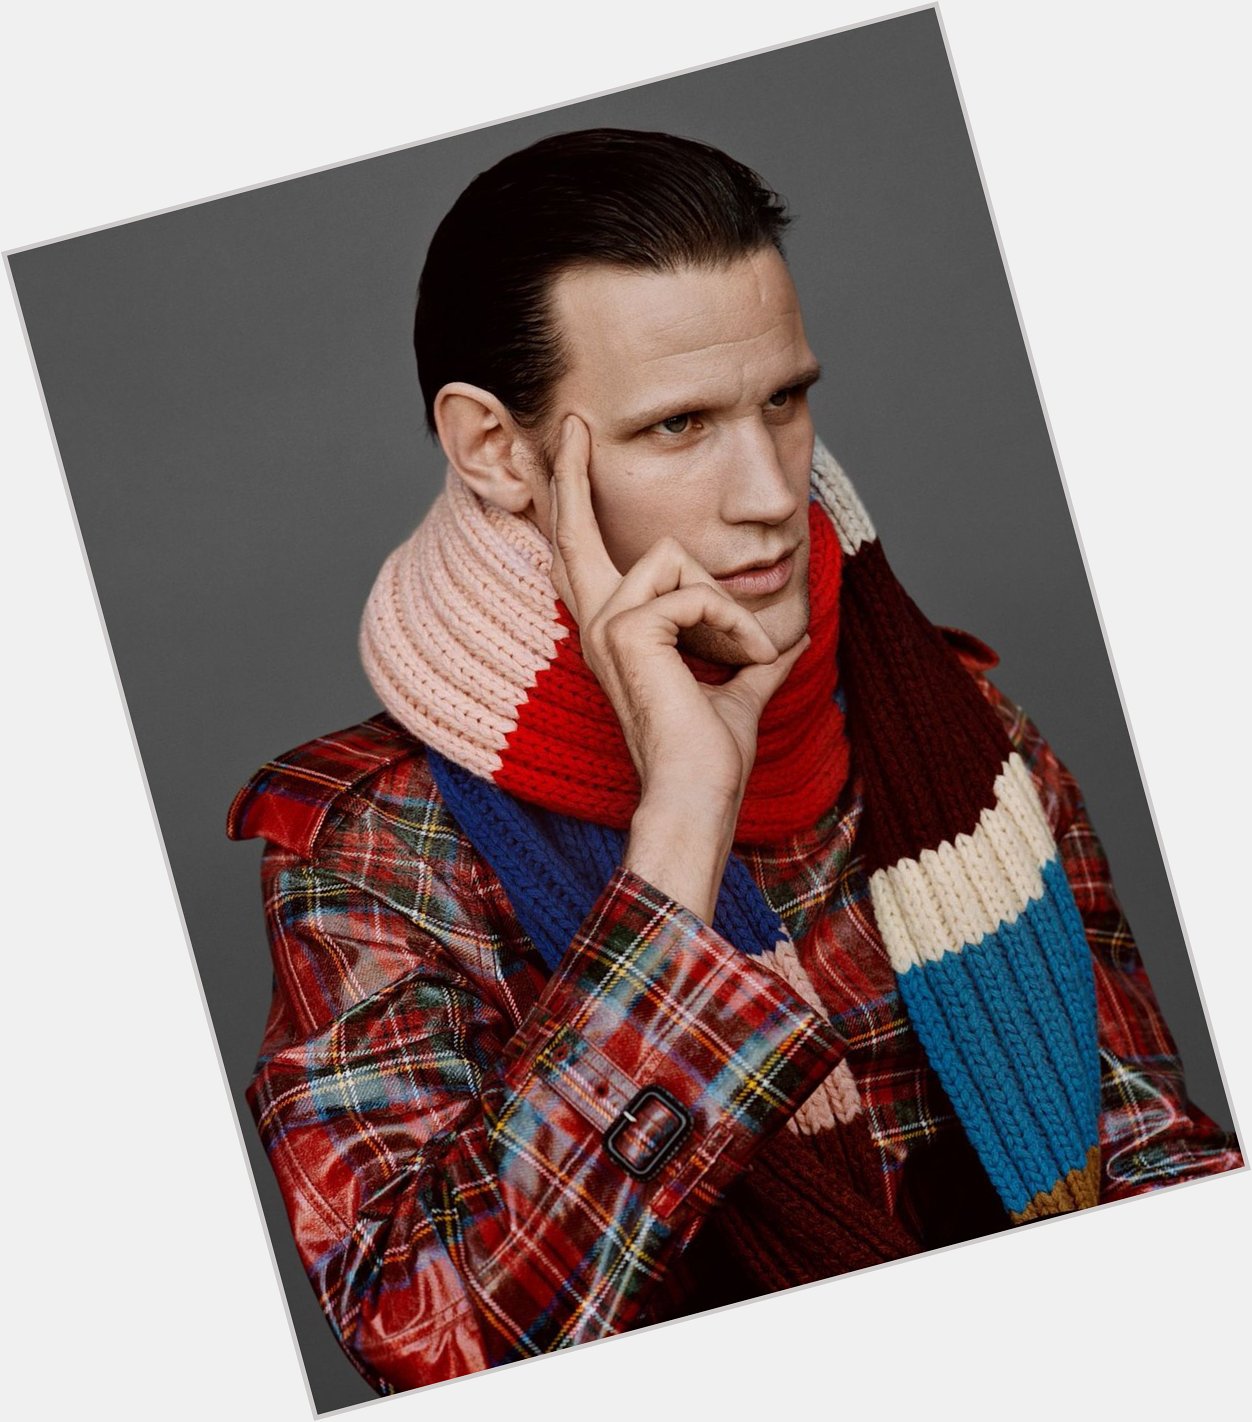 Happy birthday matt smith i want you to know you can wear me as a scarf any time you wish it would be a n honour 